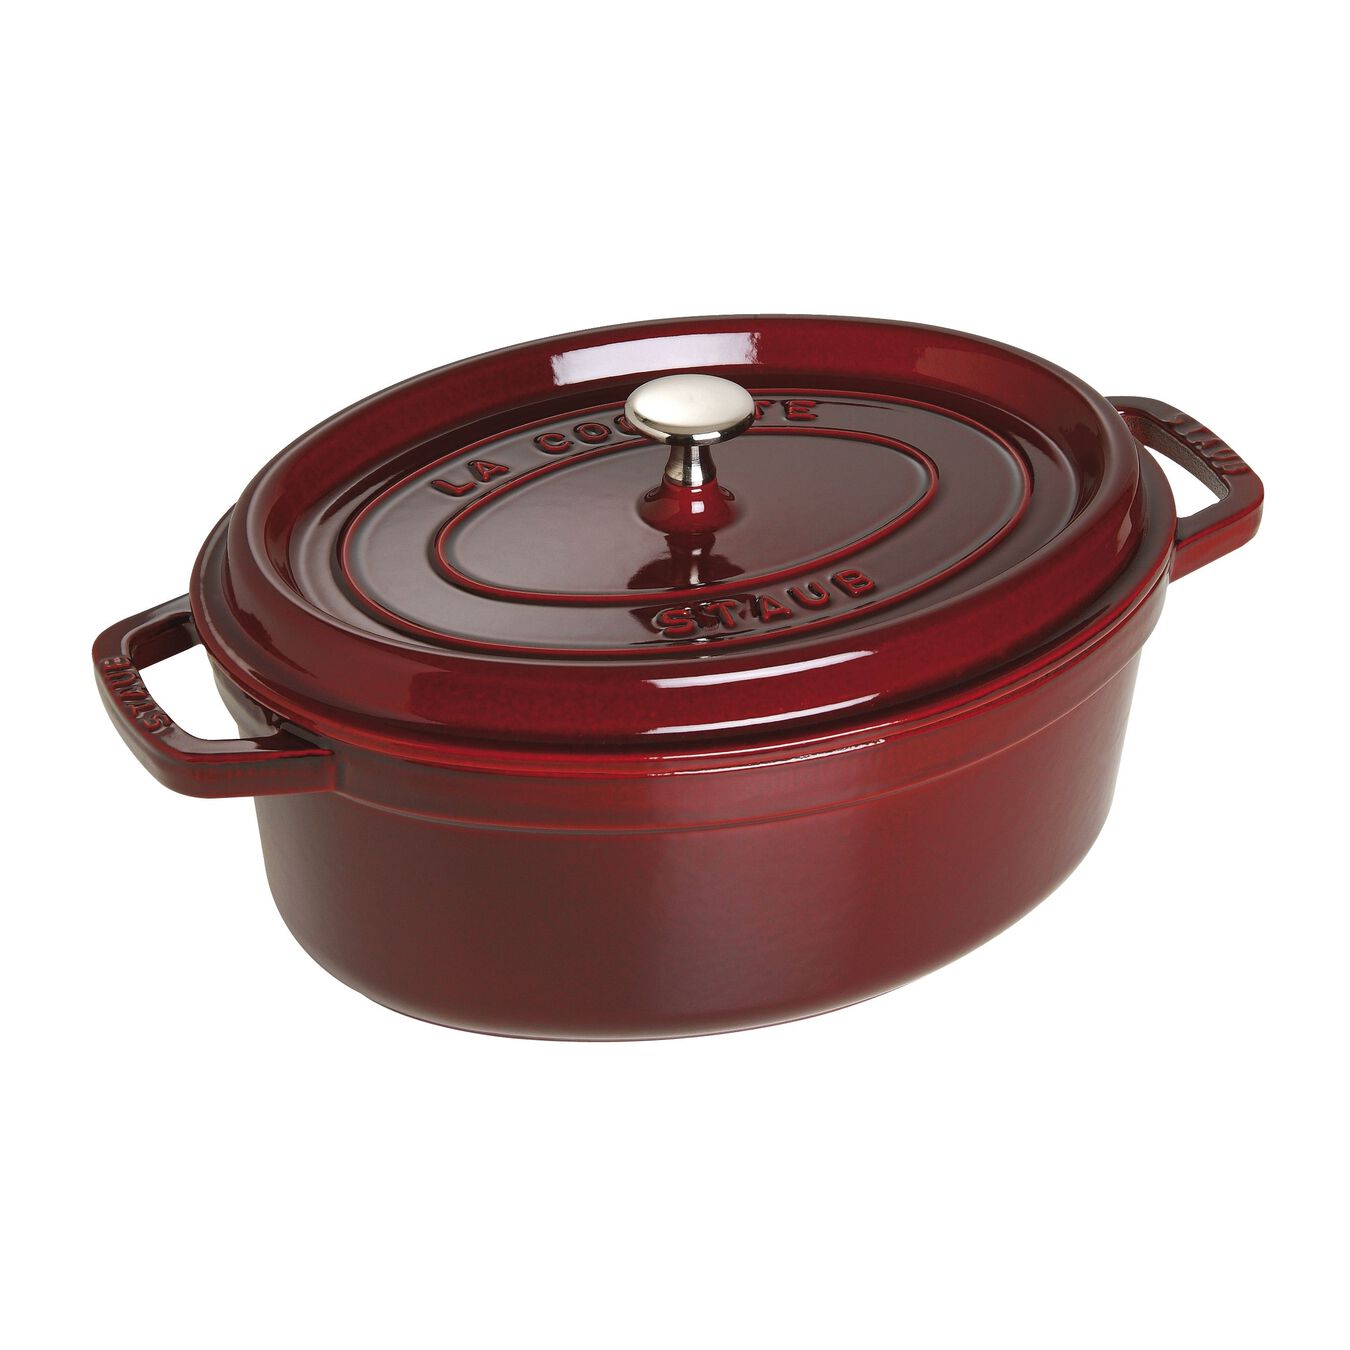 29 cm oval Cast iron Cocotte grenadine-red,,large 2